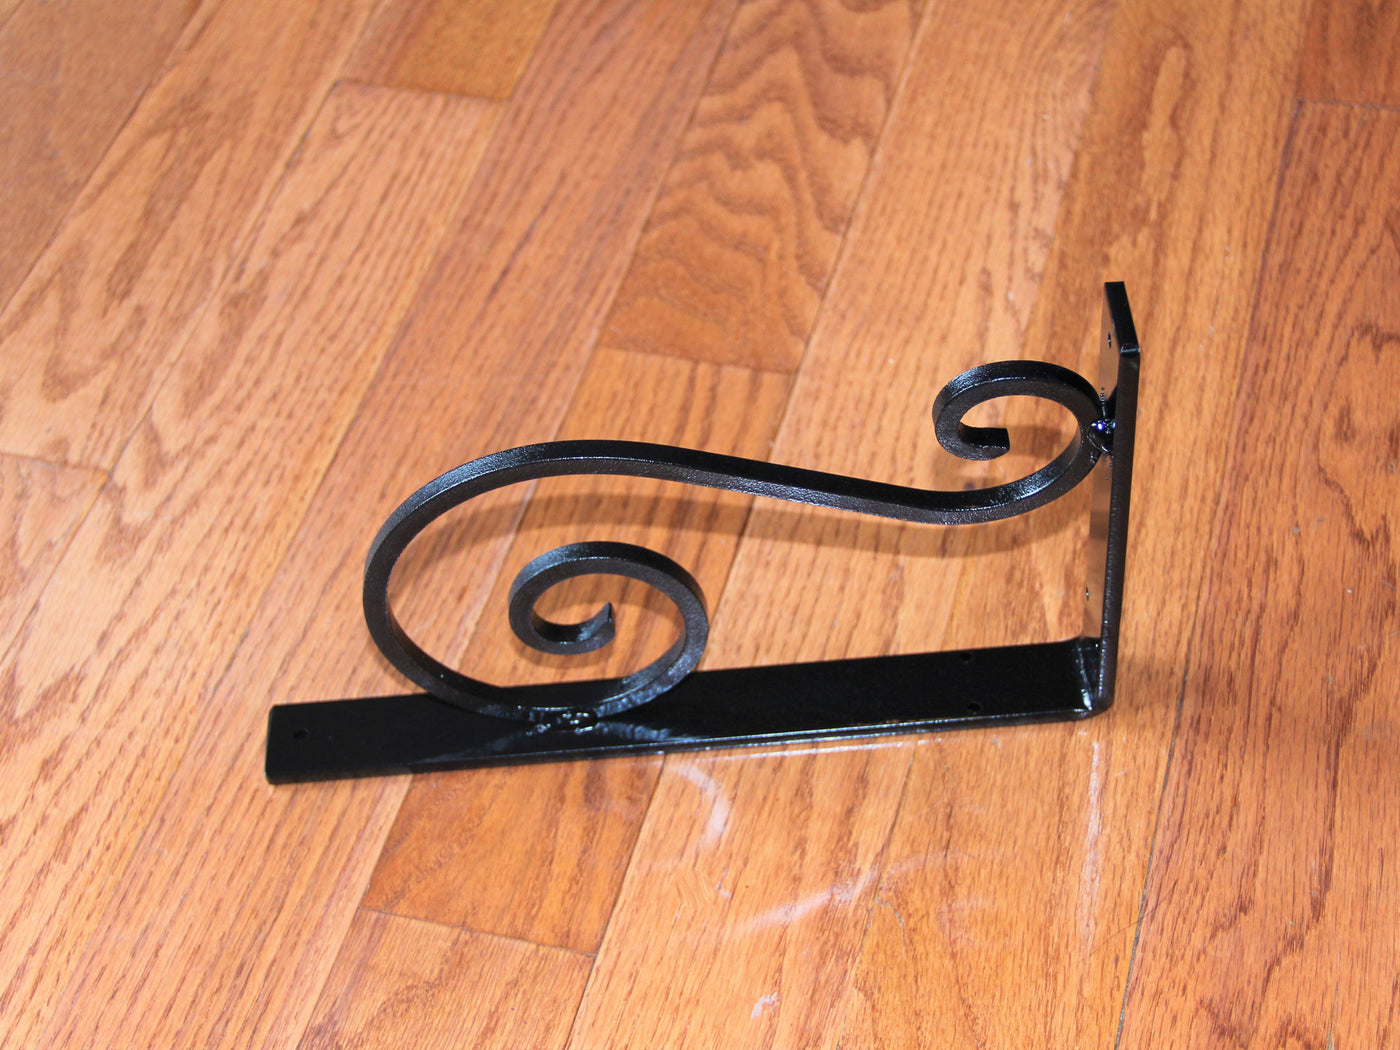 Heavy Duty Decorative S Scrolled Shelf Bracket, Forged Angle Bracket - Madison Iron and Wood - Shelf Brackets - metal outdoor decor - Steel deocrations - american made products - veteran owned business products - fencing decorations - fencing supplies - custom wall decorations - personalized wall signs - steel - decorative post caps - steel post caps - metal post caps - brackets - structural brackets - home improvement - easter - easter decorations - easter gift - easter yard decor